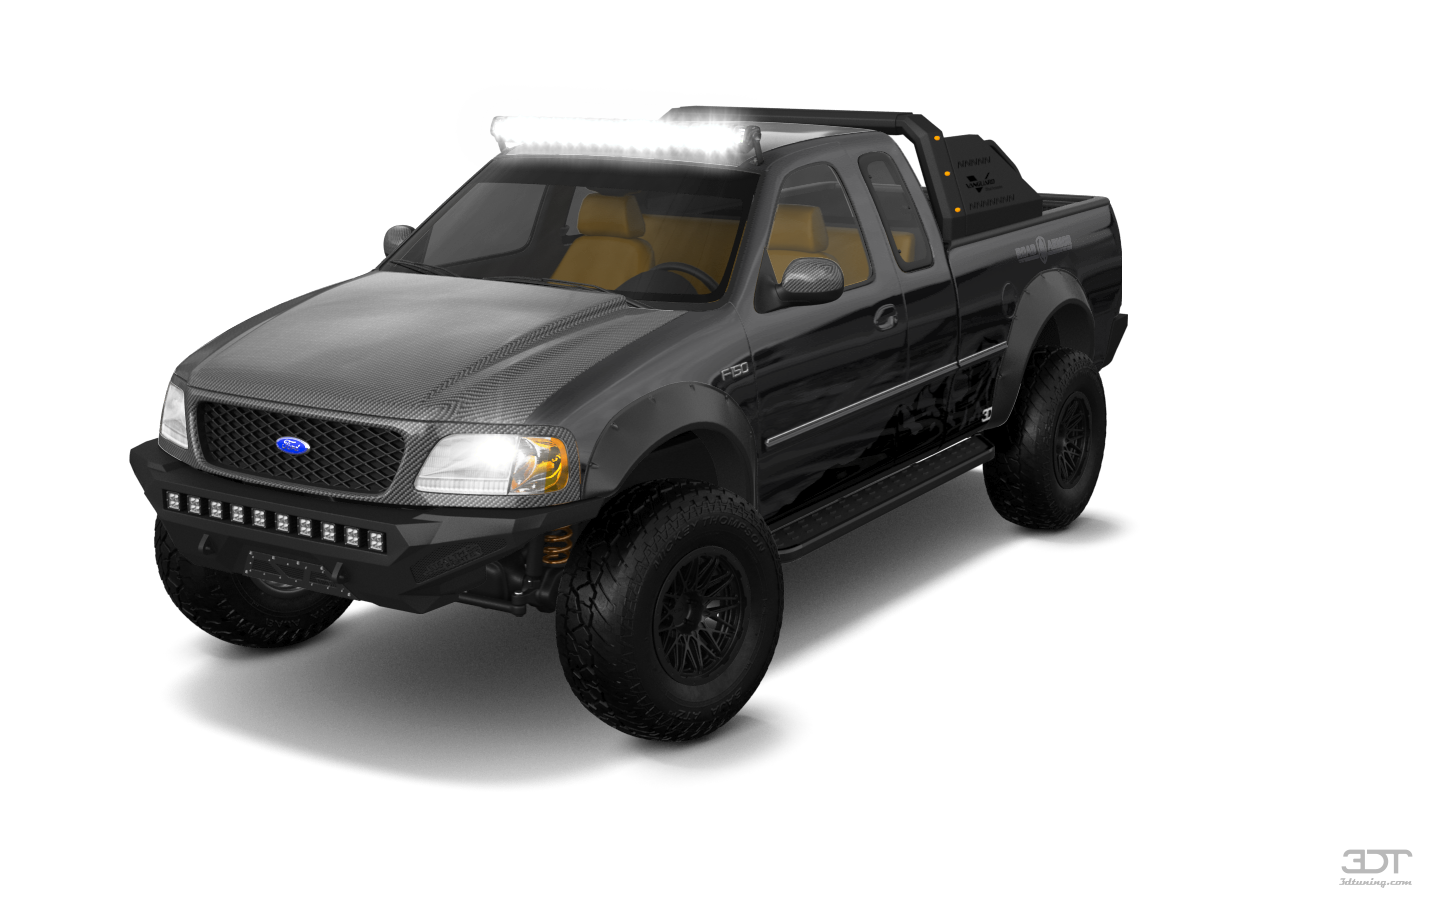 Ford F-150 SuperCab 2 Door pickup truck 1997 tuning